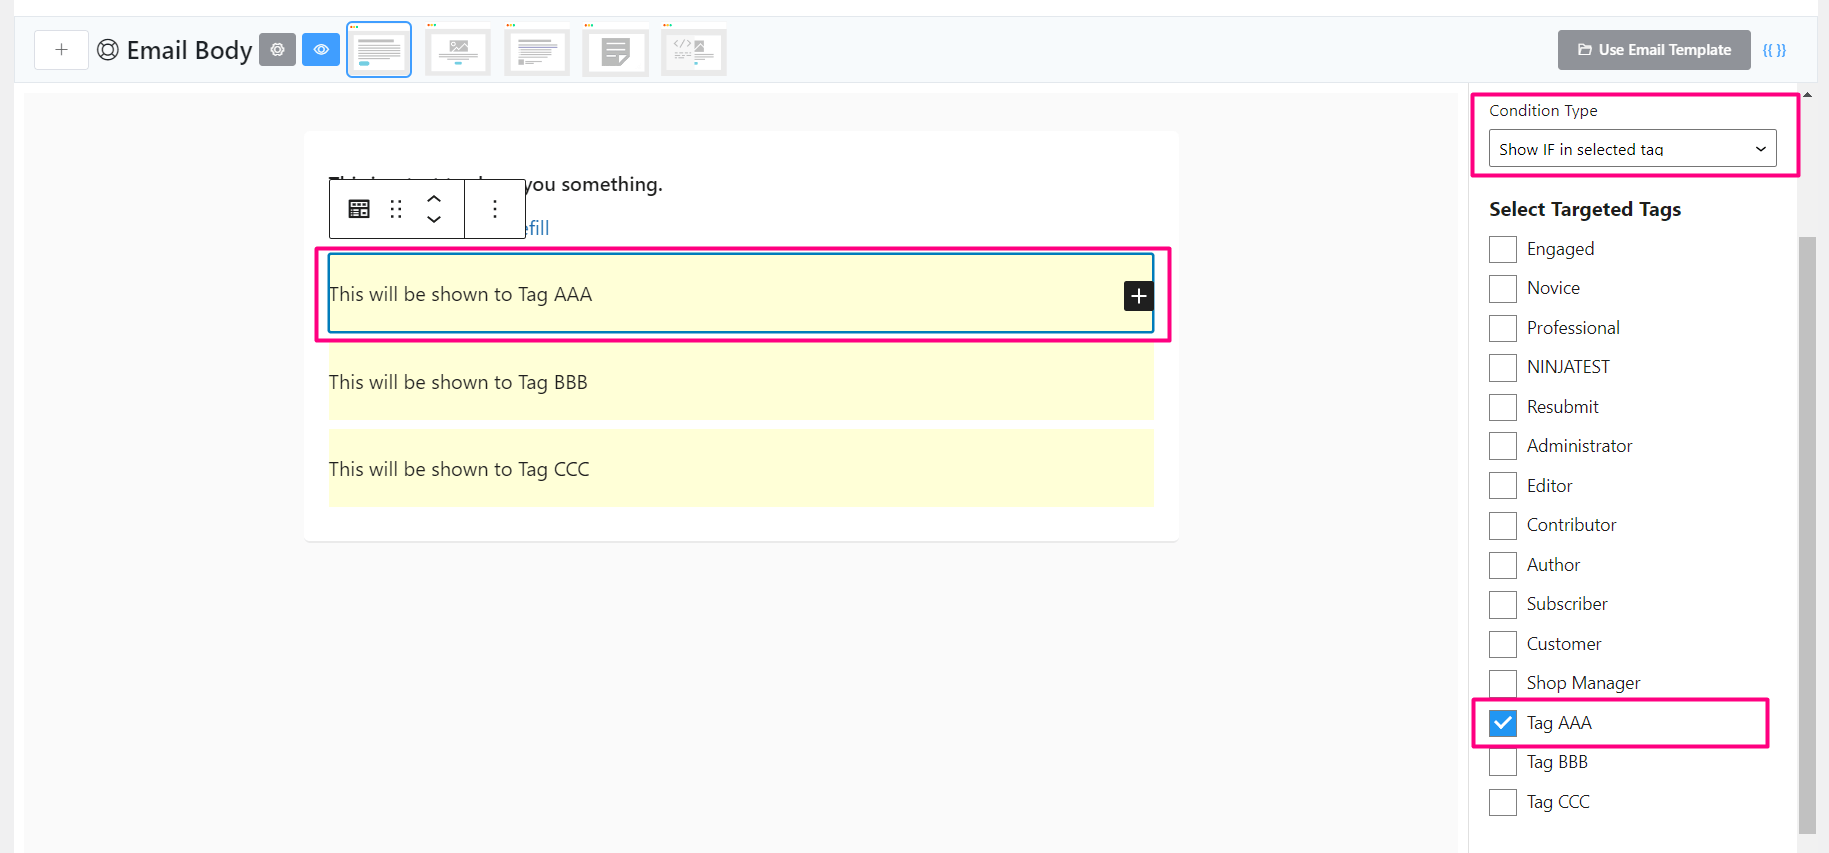 crm email editor conditional block